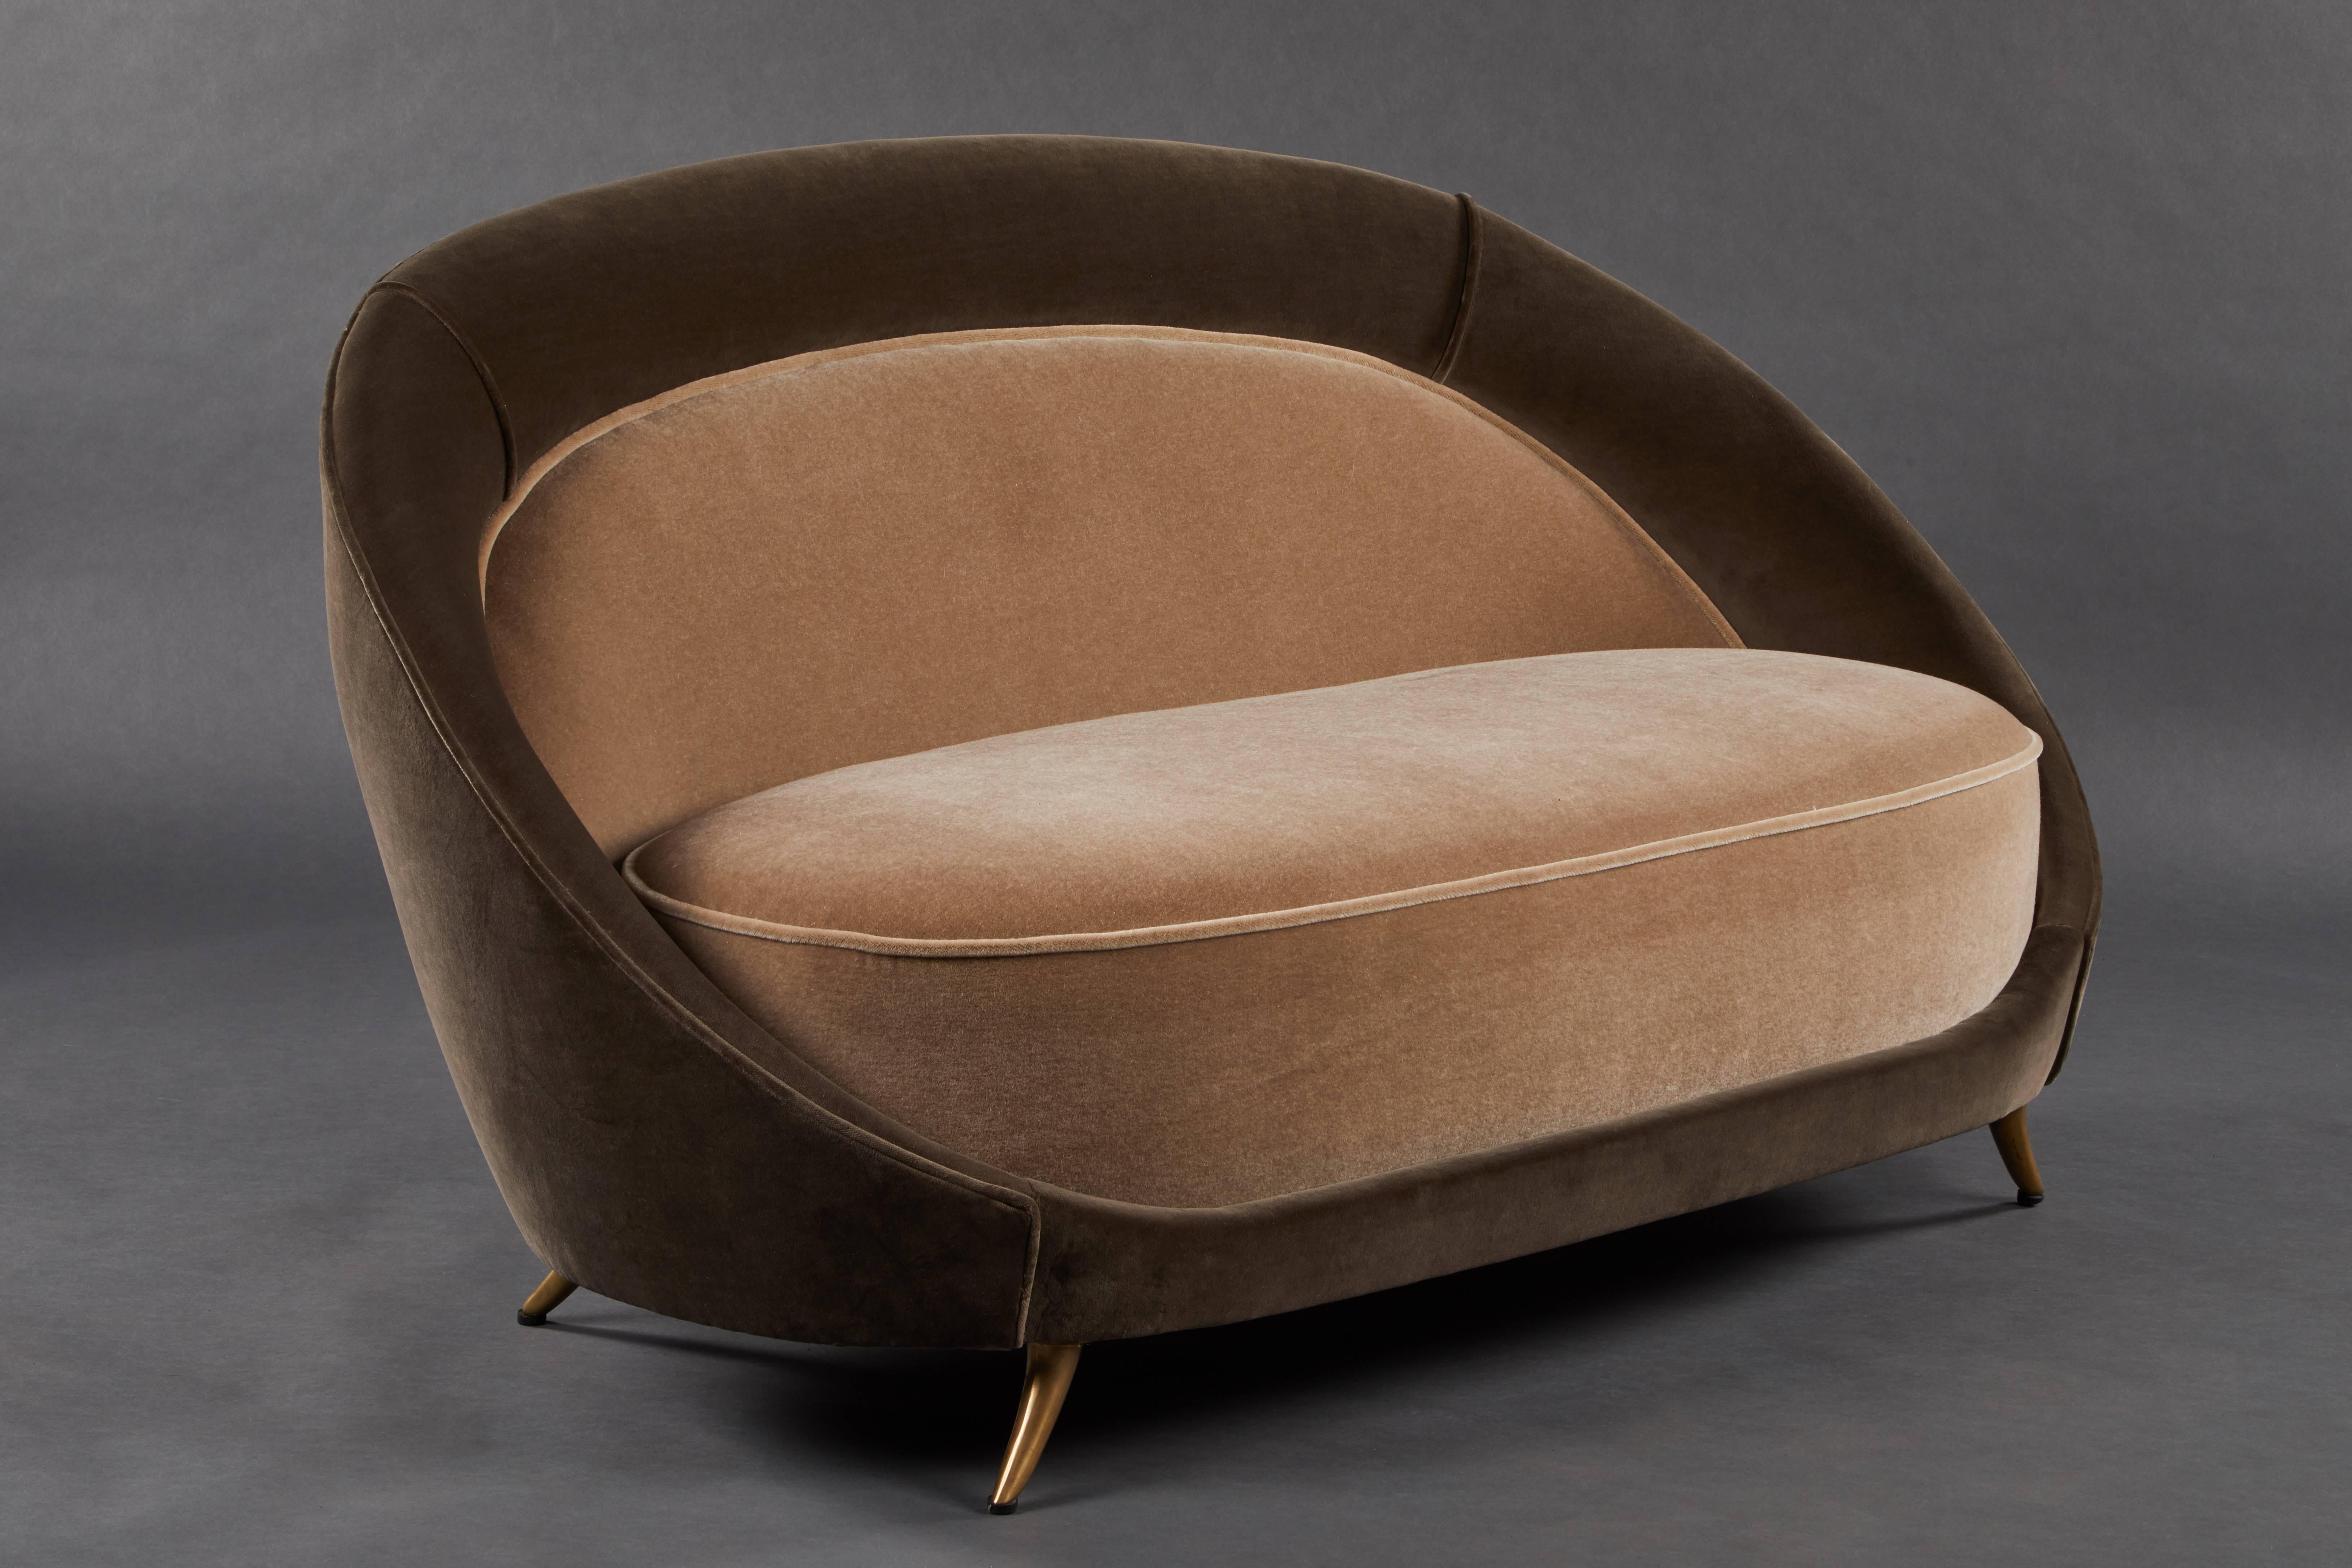 20th Century Two-Tone Settee by Silvio Cavatorta for Production ISA